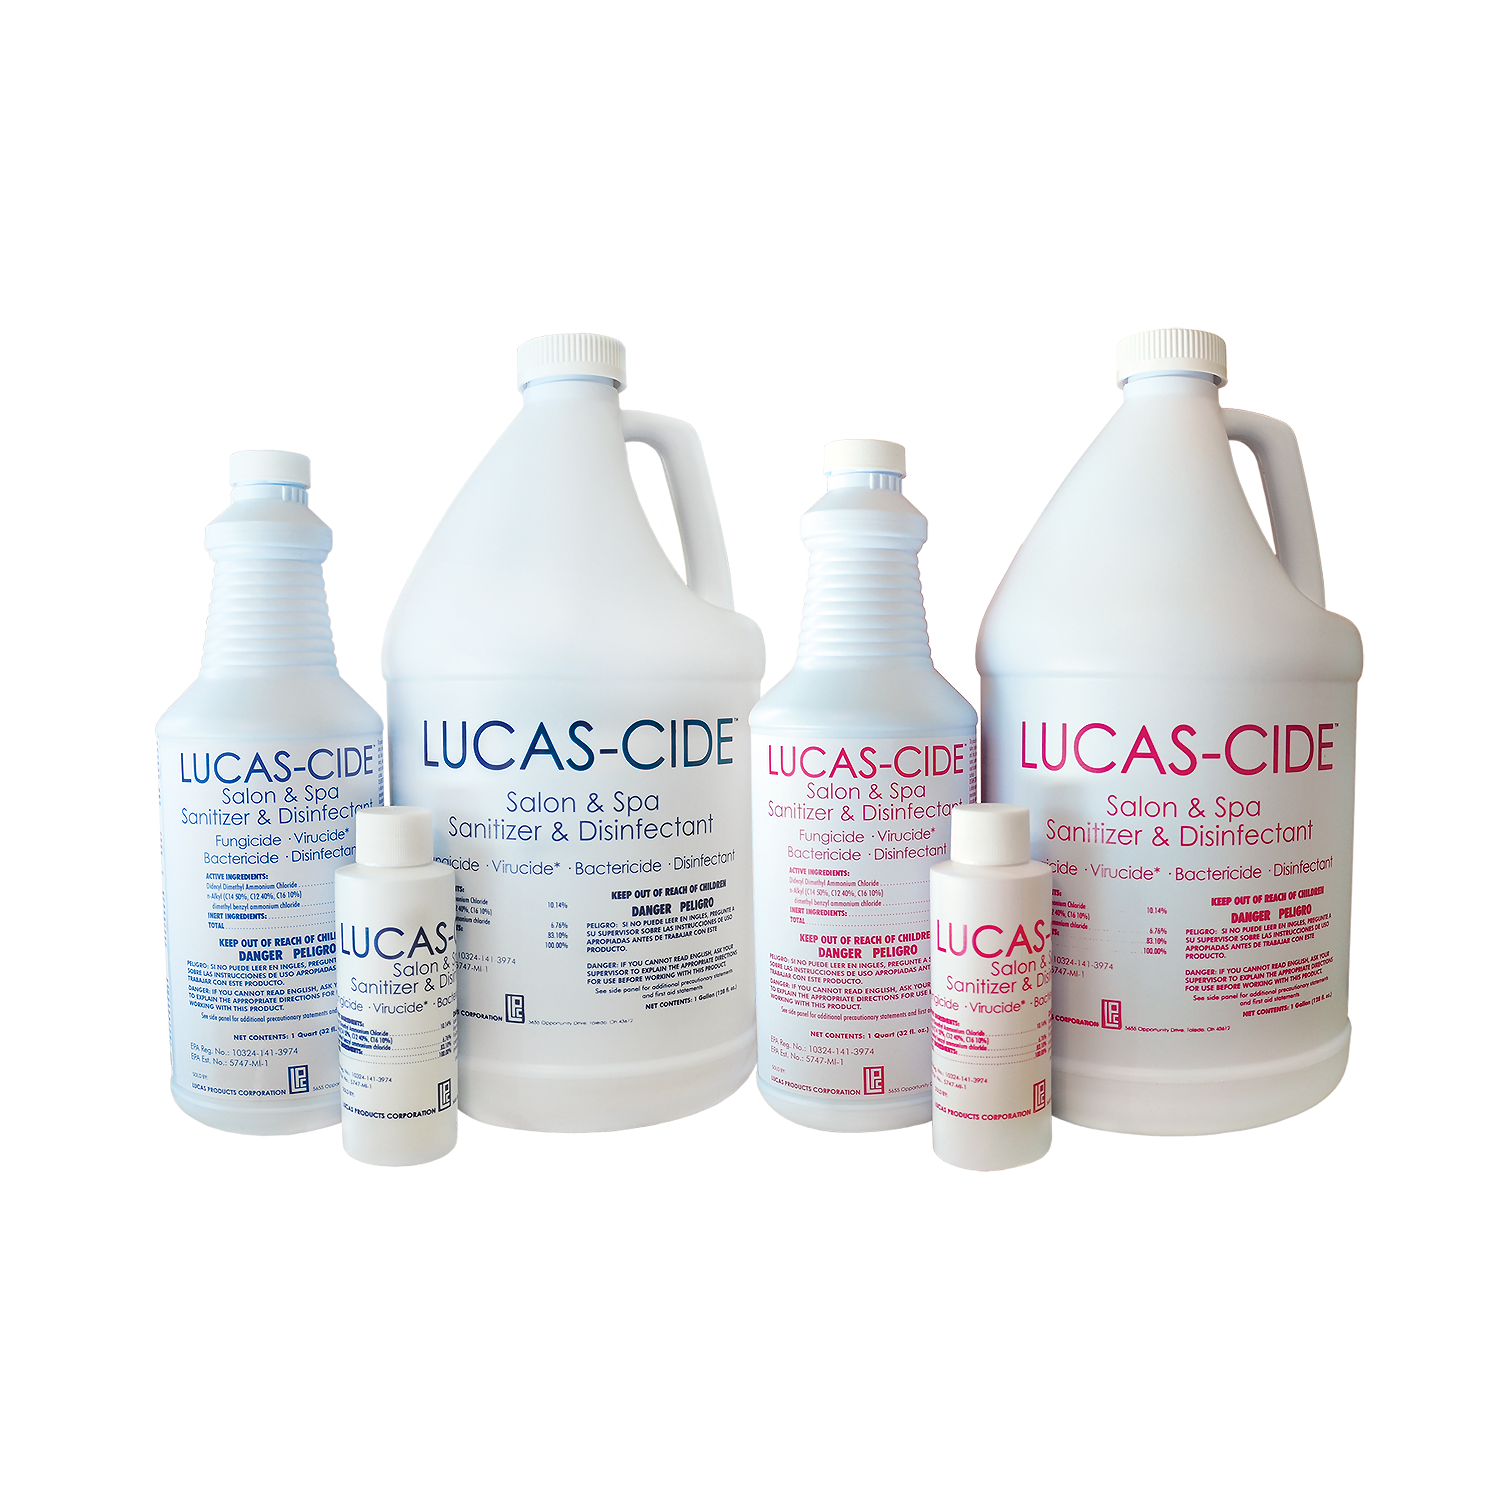 LUCAS-CIDE concentrated disinfectant product line